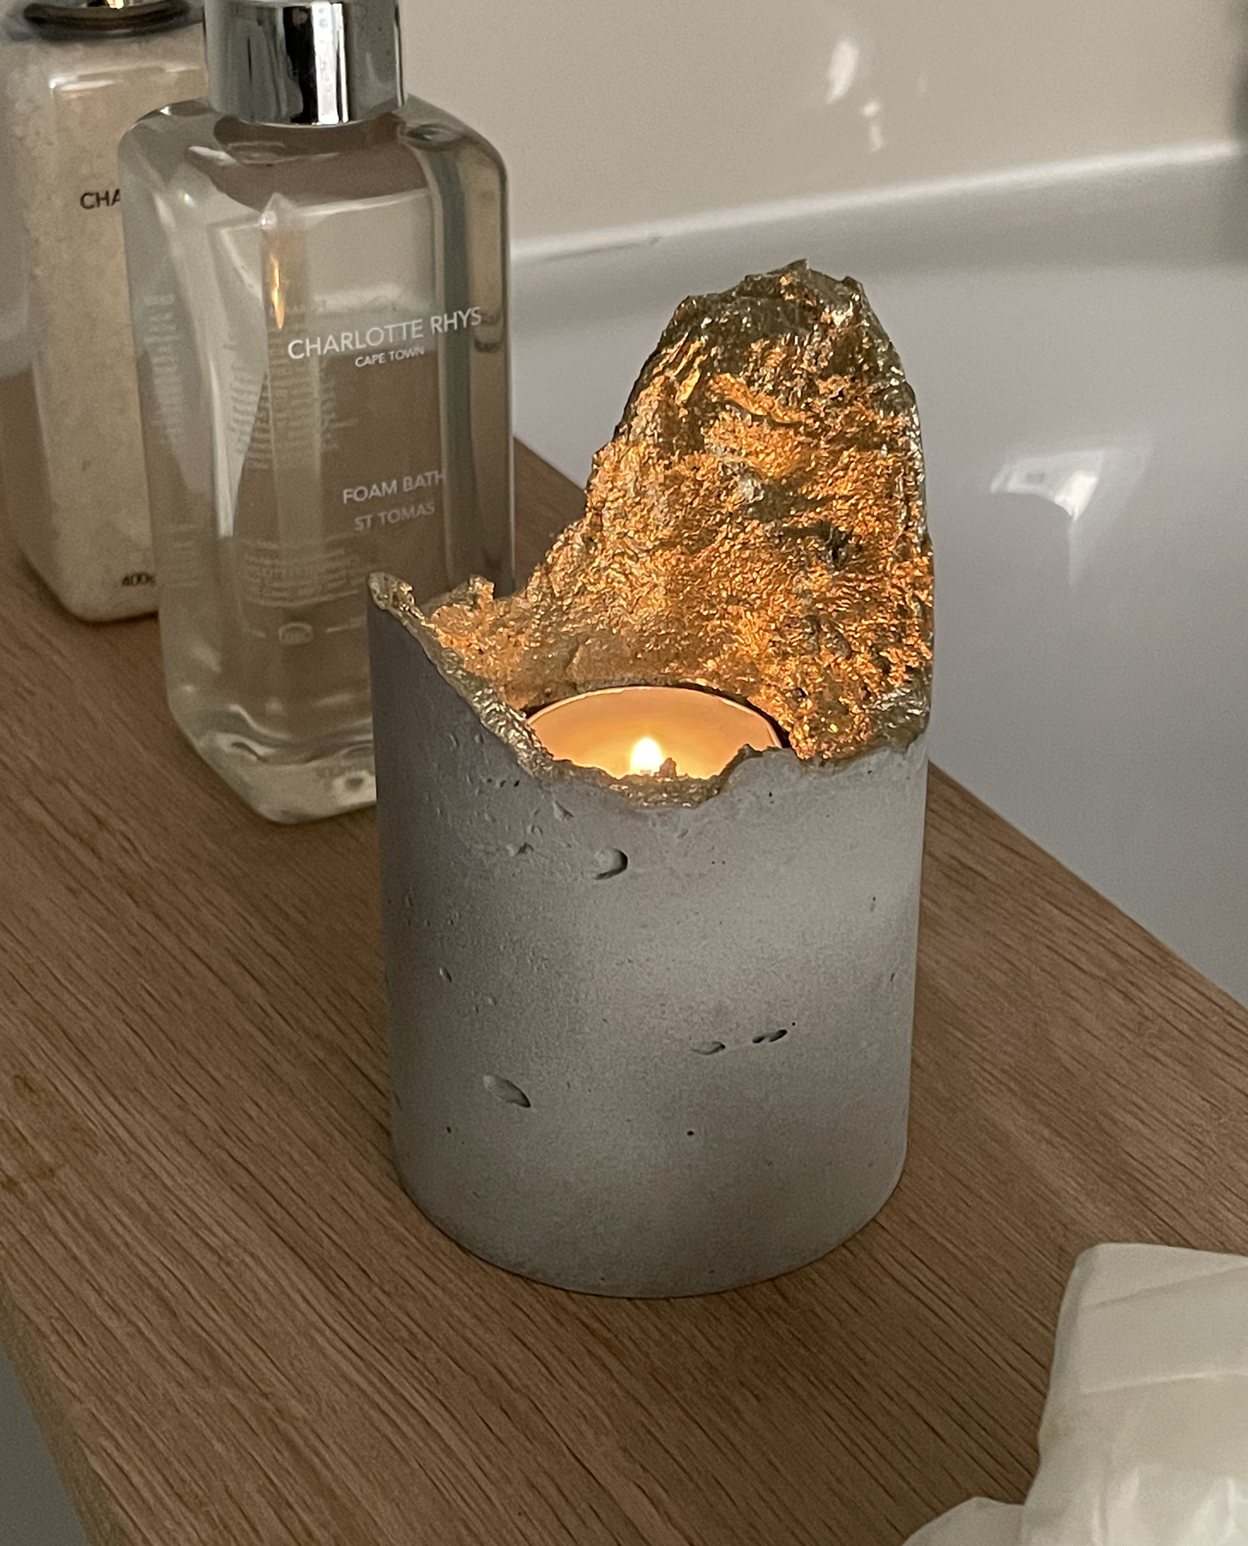 Behind the Clouds Candle